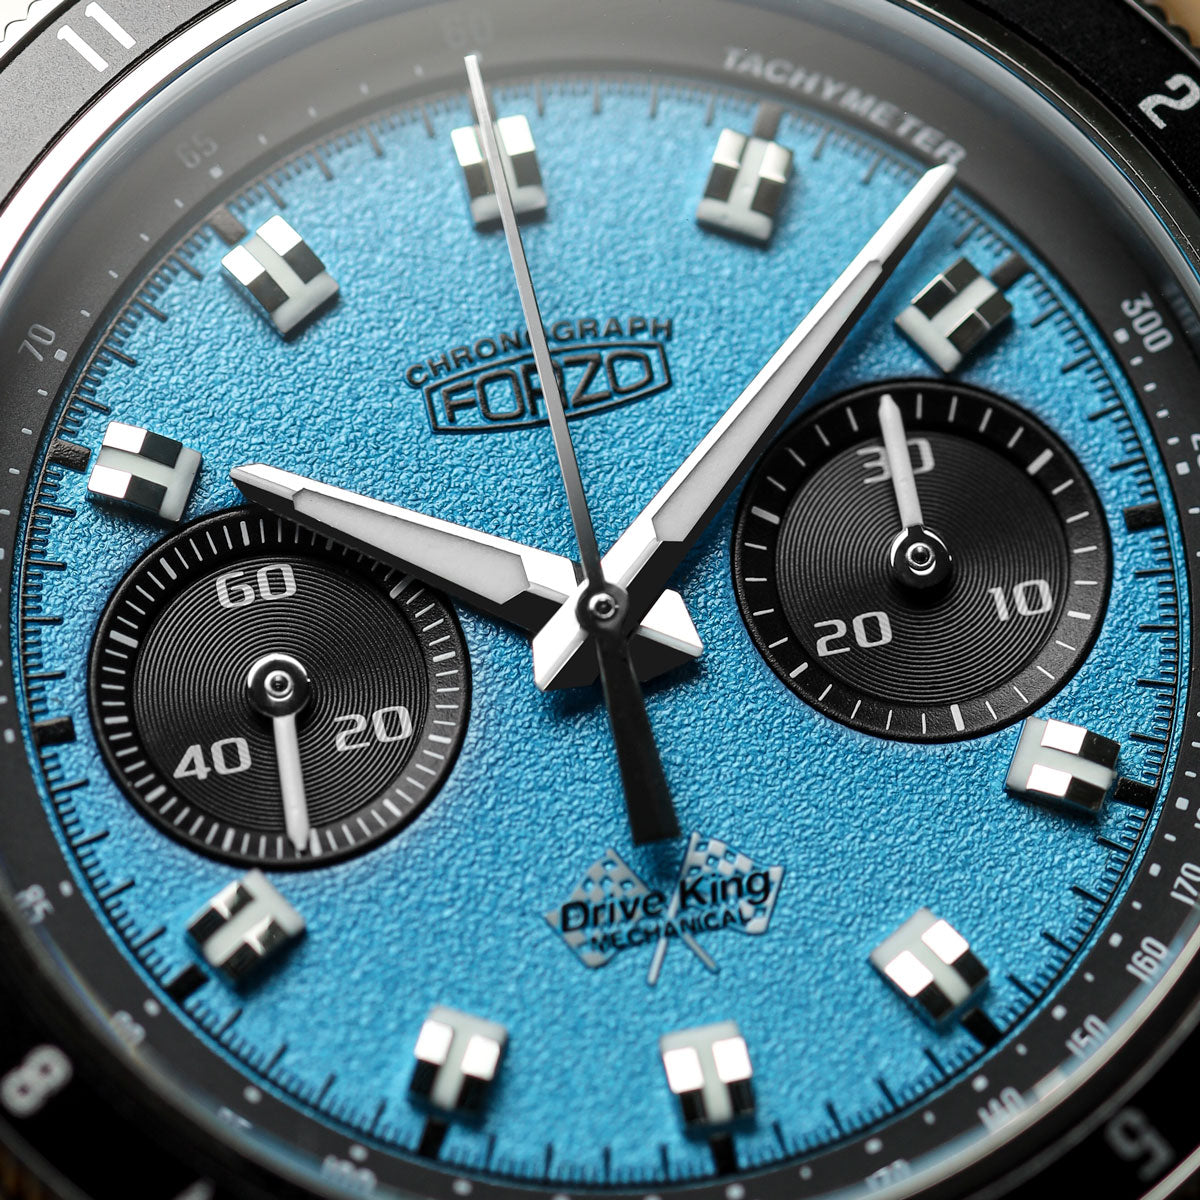 FORZO Drive King Mechanical Chronograph - Blue Dial - 5-Link Bracelet - additional image 1